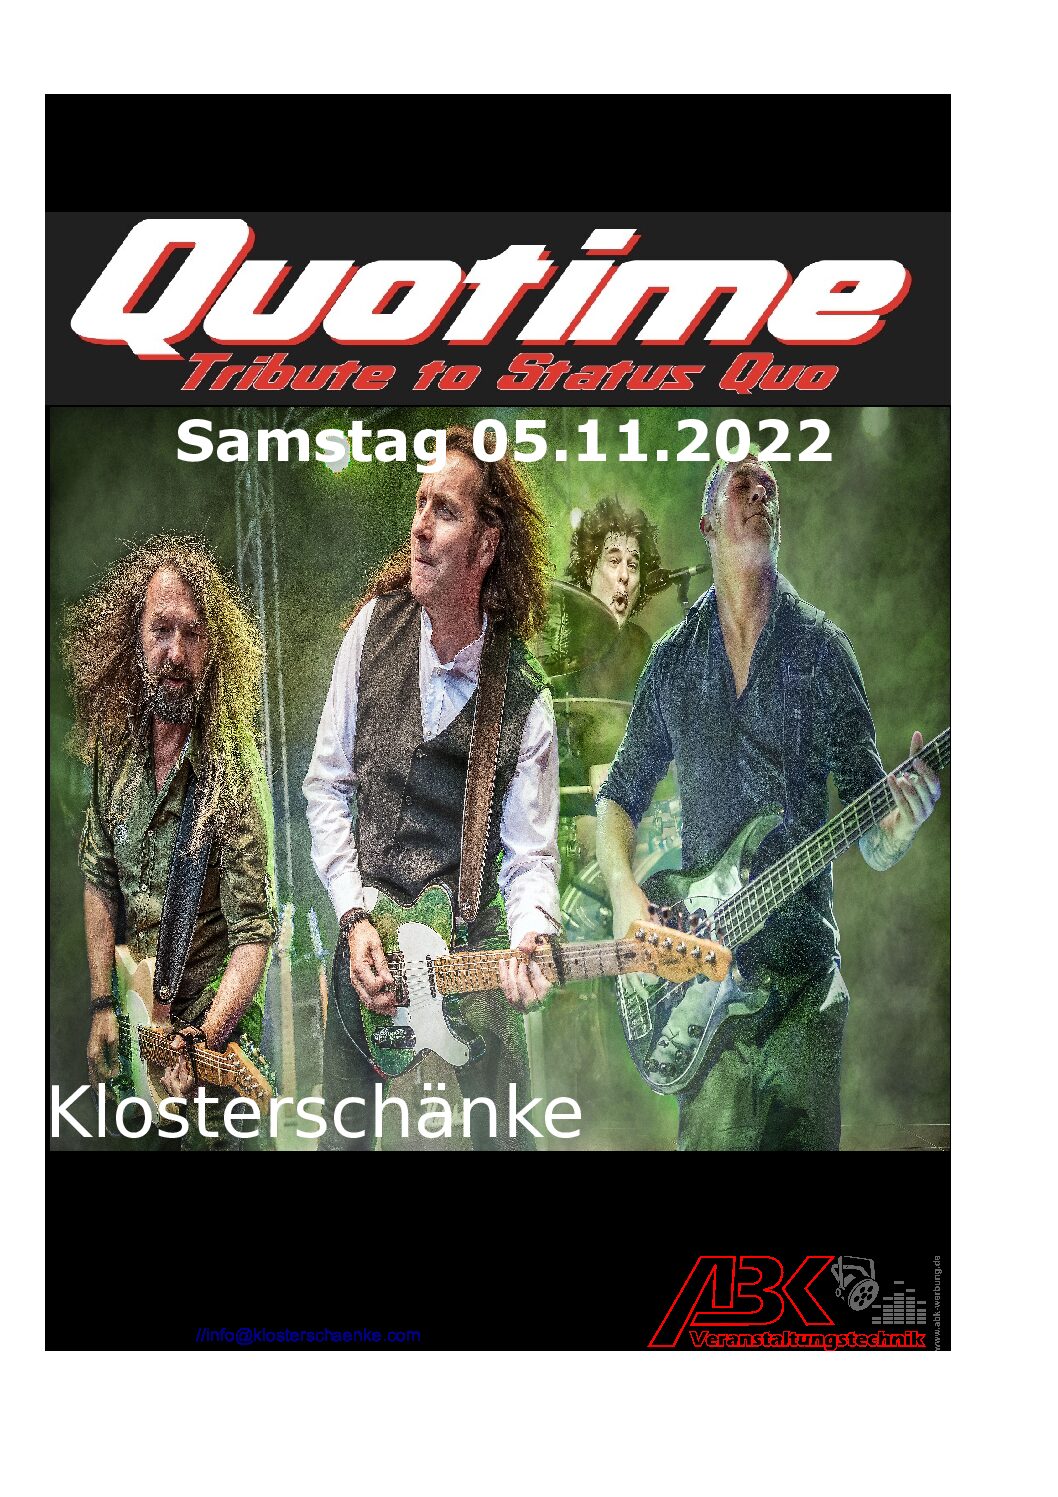 QUOTIME – A Tribute to Status Quo